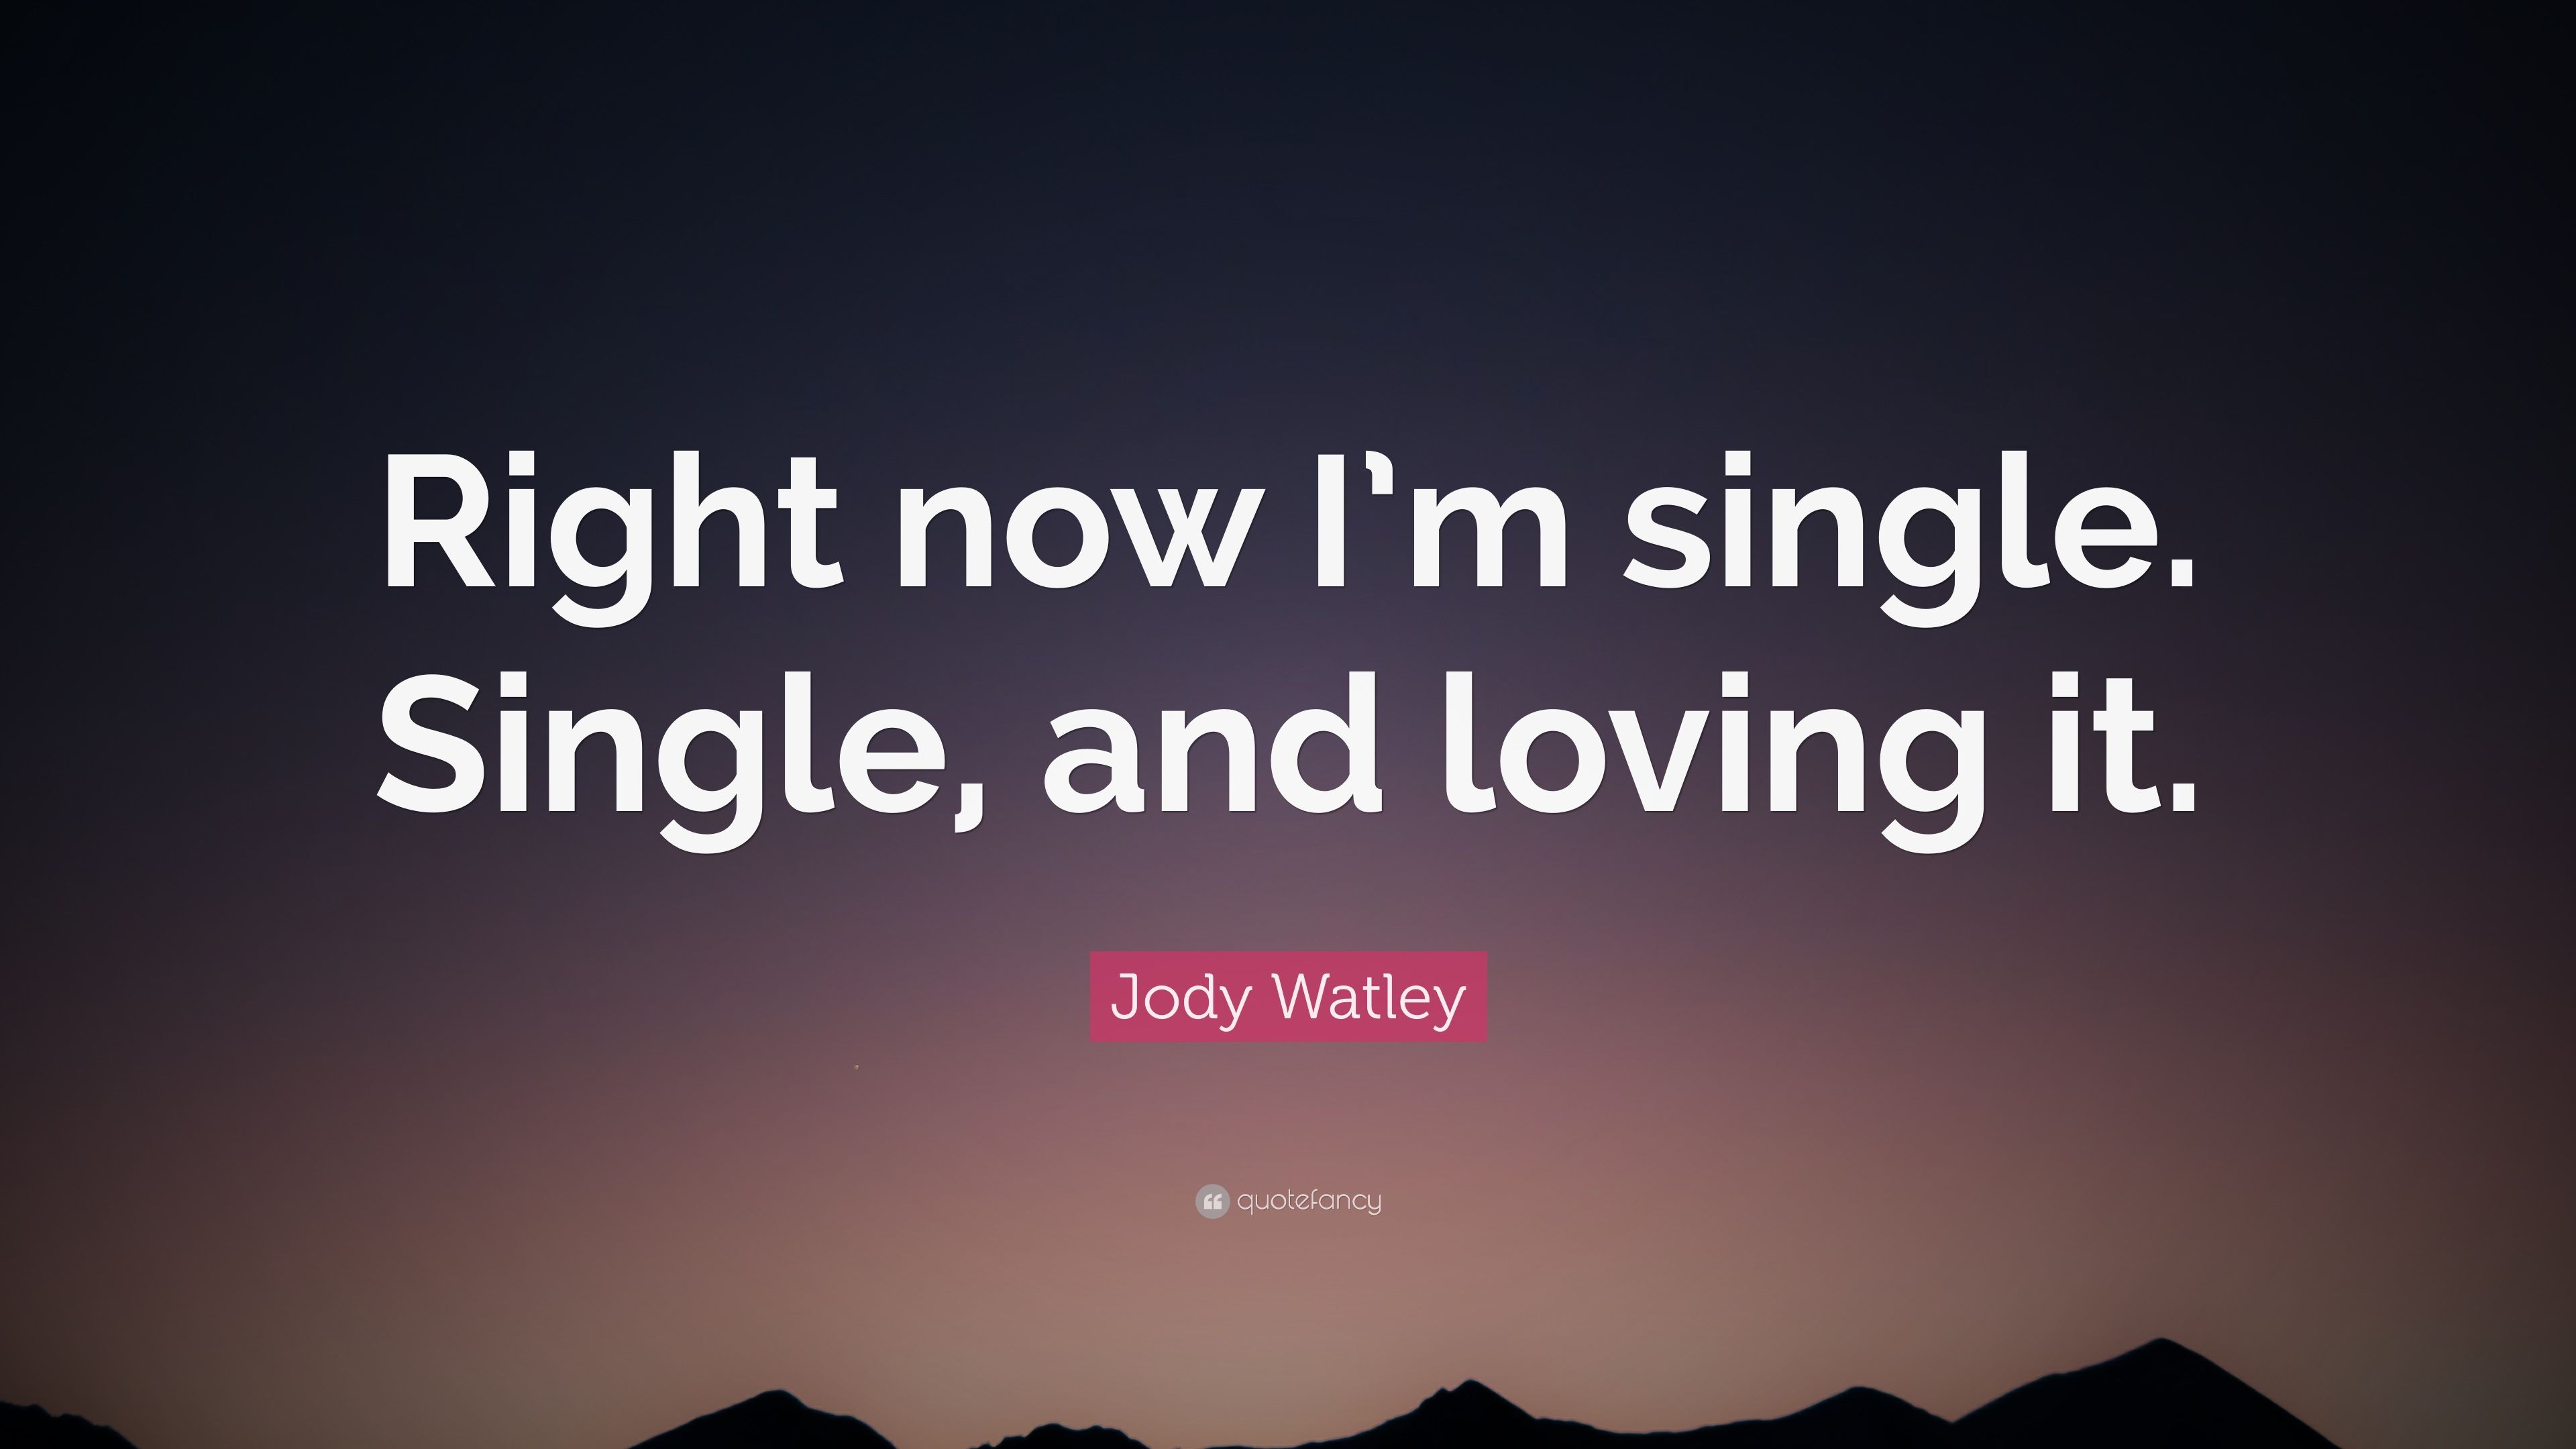 Jody Watley Quote: “Right now I'm single. Single, and loving it.” (10 wallpaper)